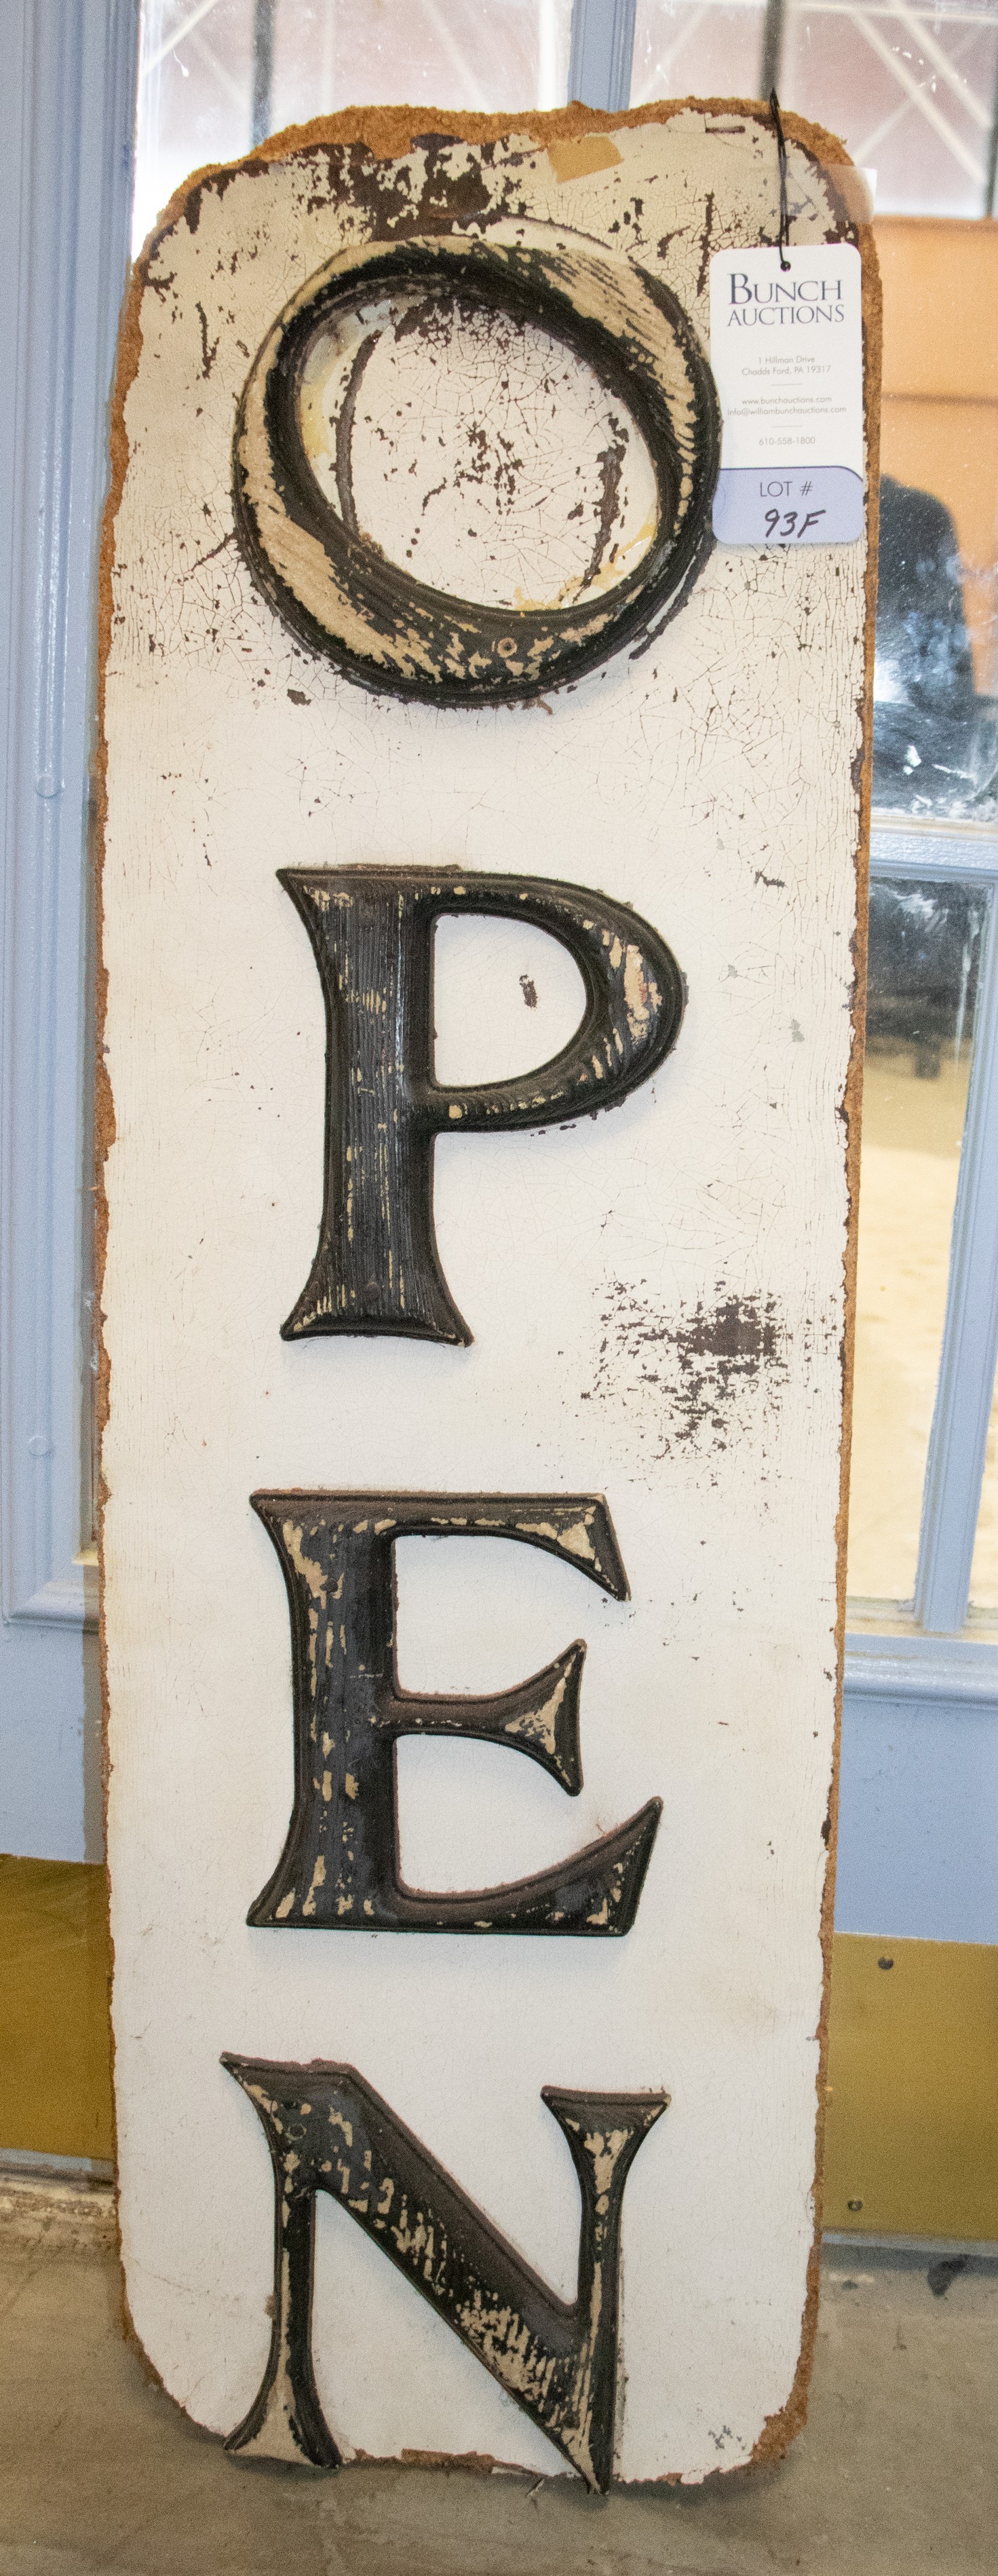 Rustic Open sign, painted pressed